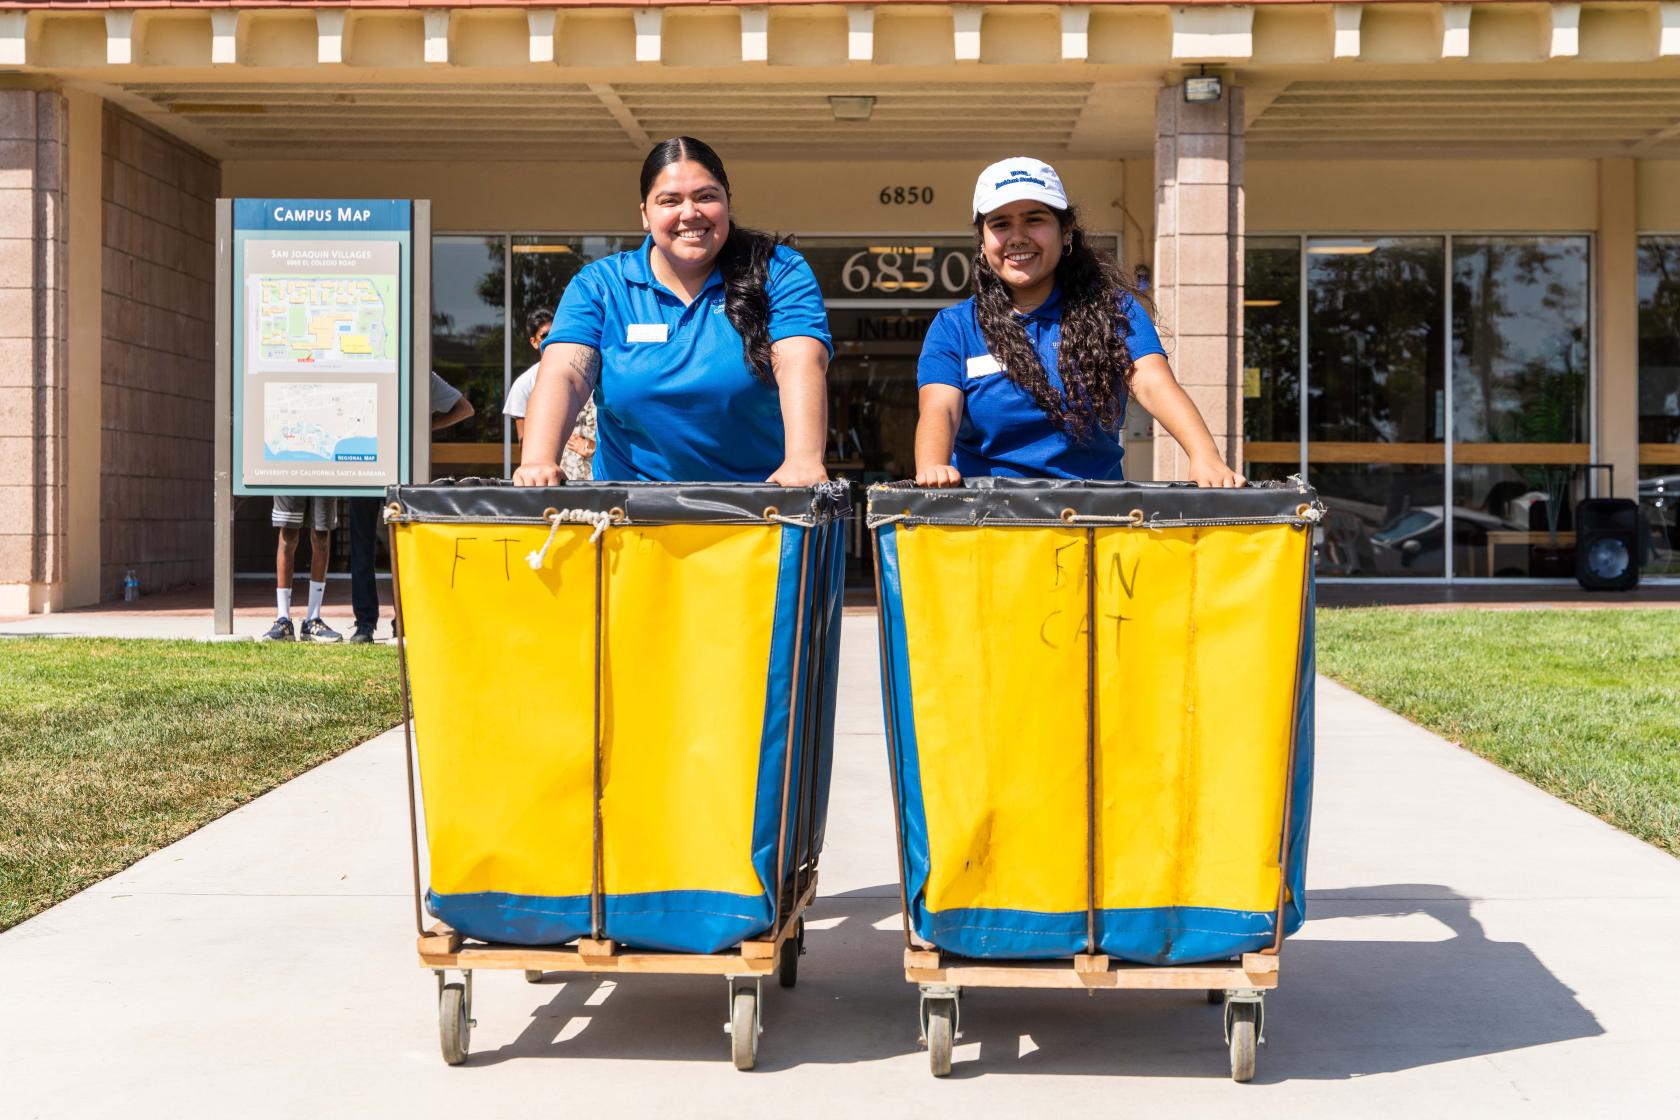 HDAE Staff at UCSB Move-in 2022